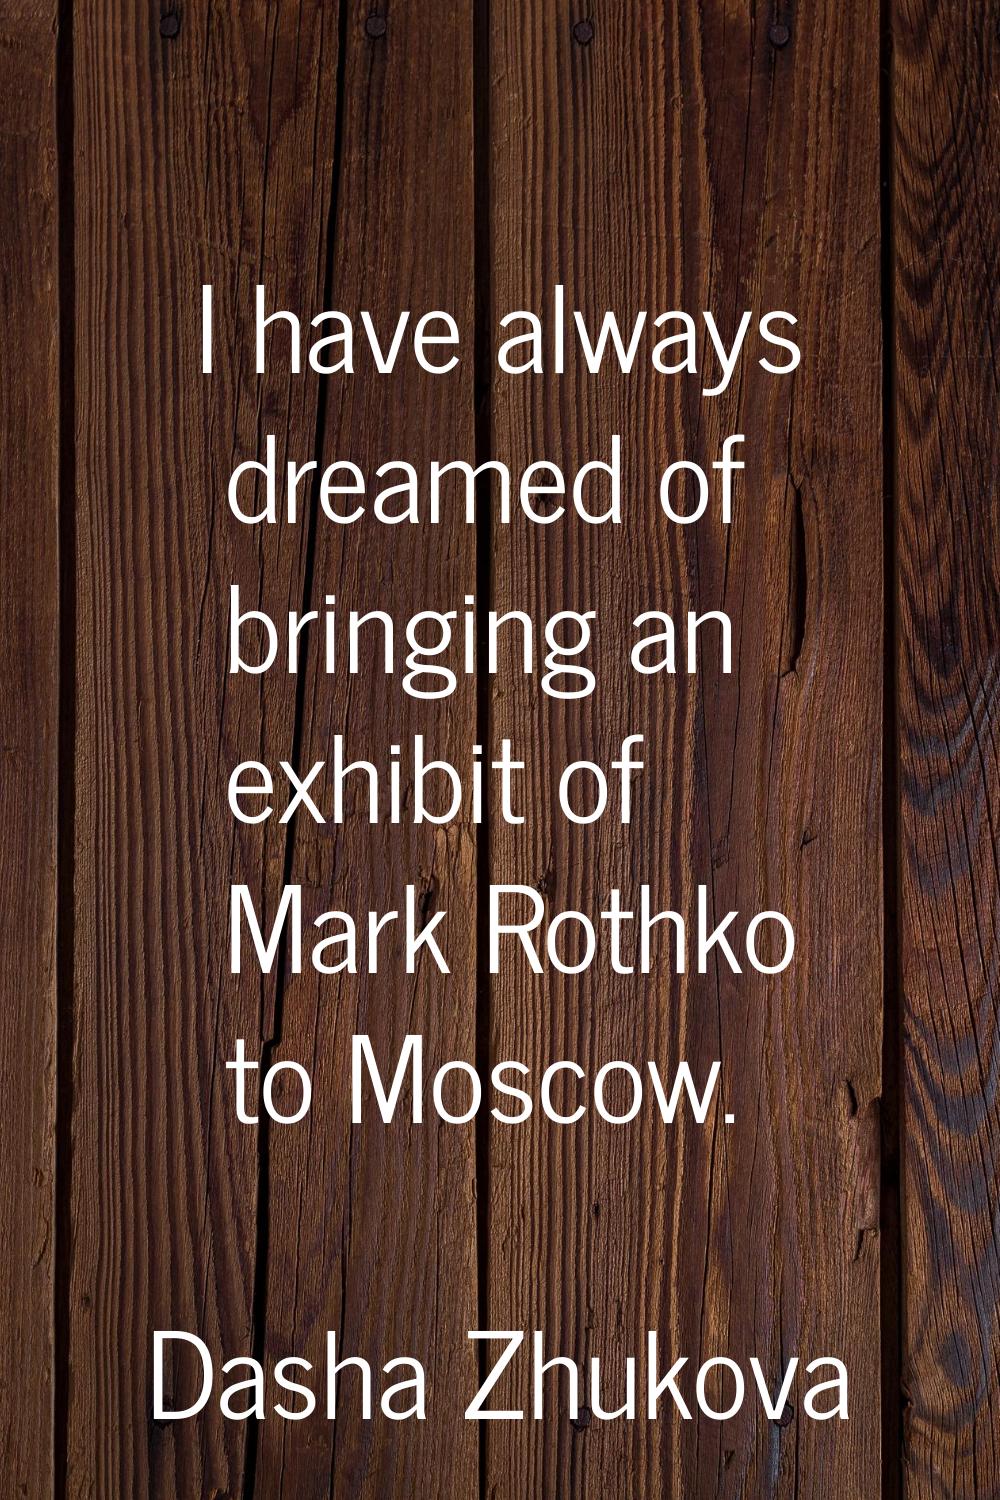 I have always dreamed of bringing an exhibit of Mark Rothko to Moscow.